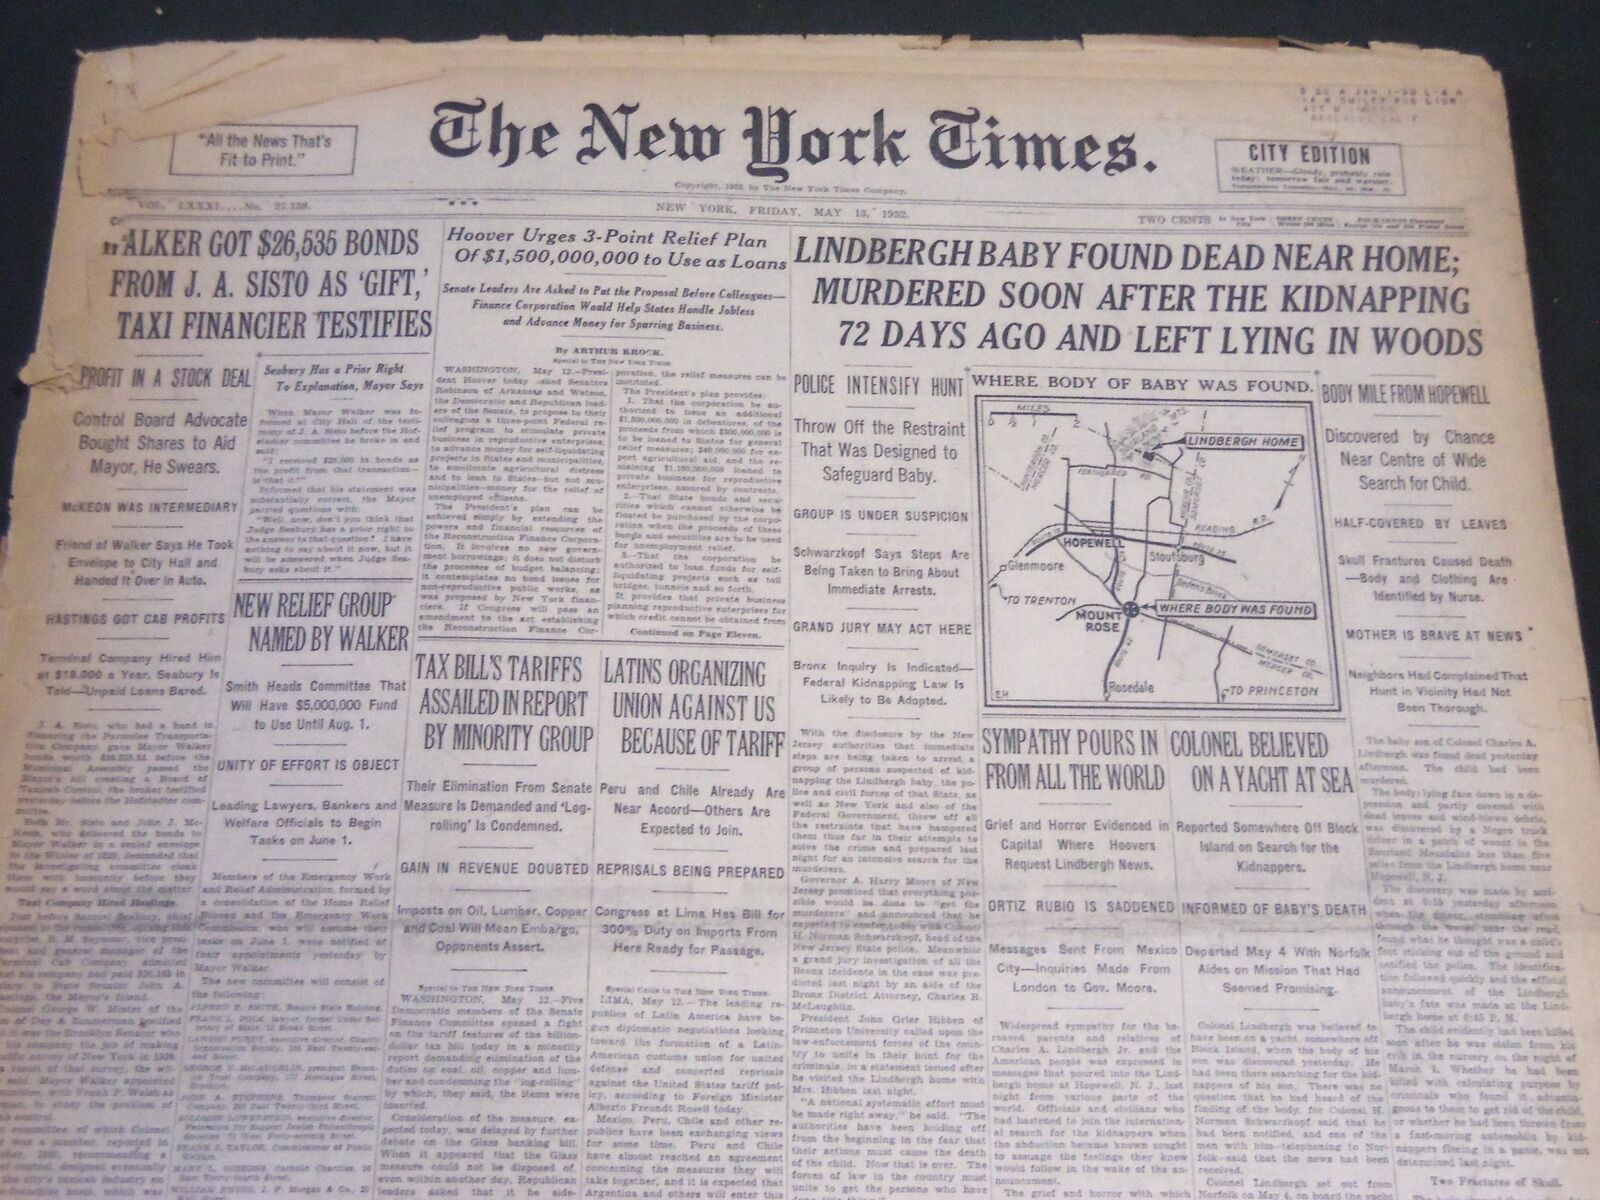 1932 MAY 13 NEW YORK TIMES - LINDBERGH BABY FOUND DEAD NEAR HOME - NT 6184